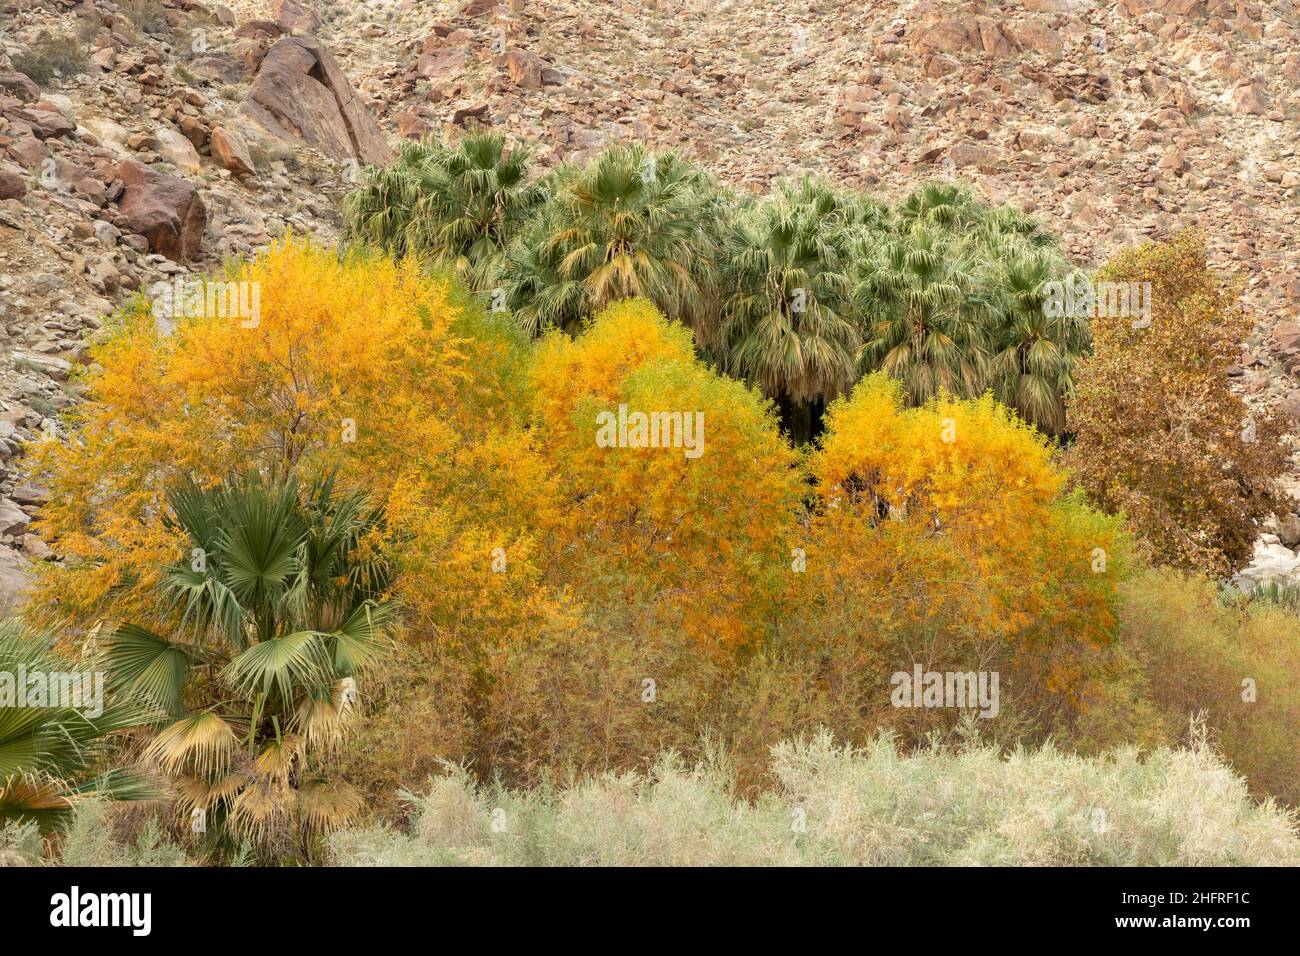 View of Palm trees and other plants in Borrego Palm Canyon, Anza-Borrego Desert State Park, California Stock Photo